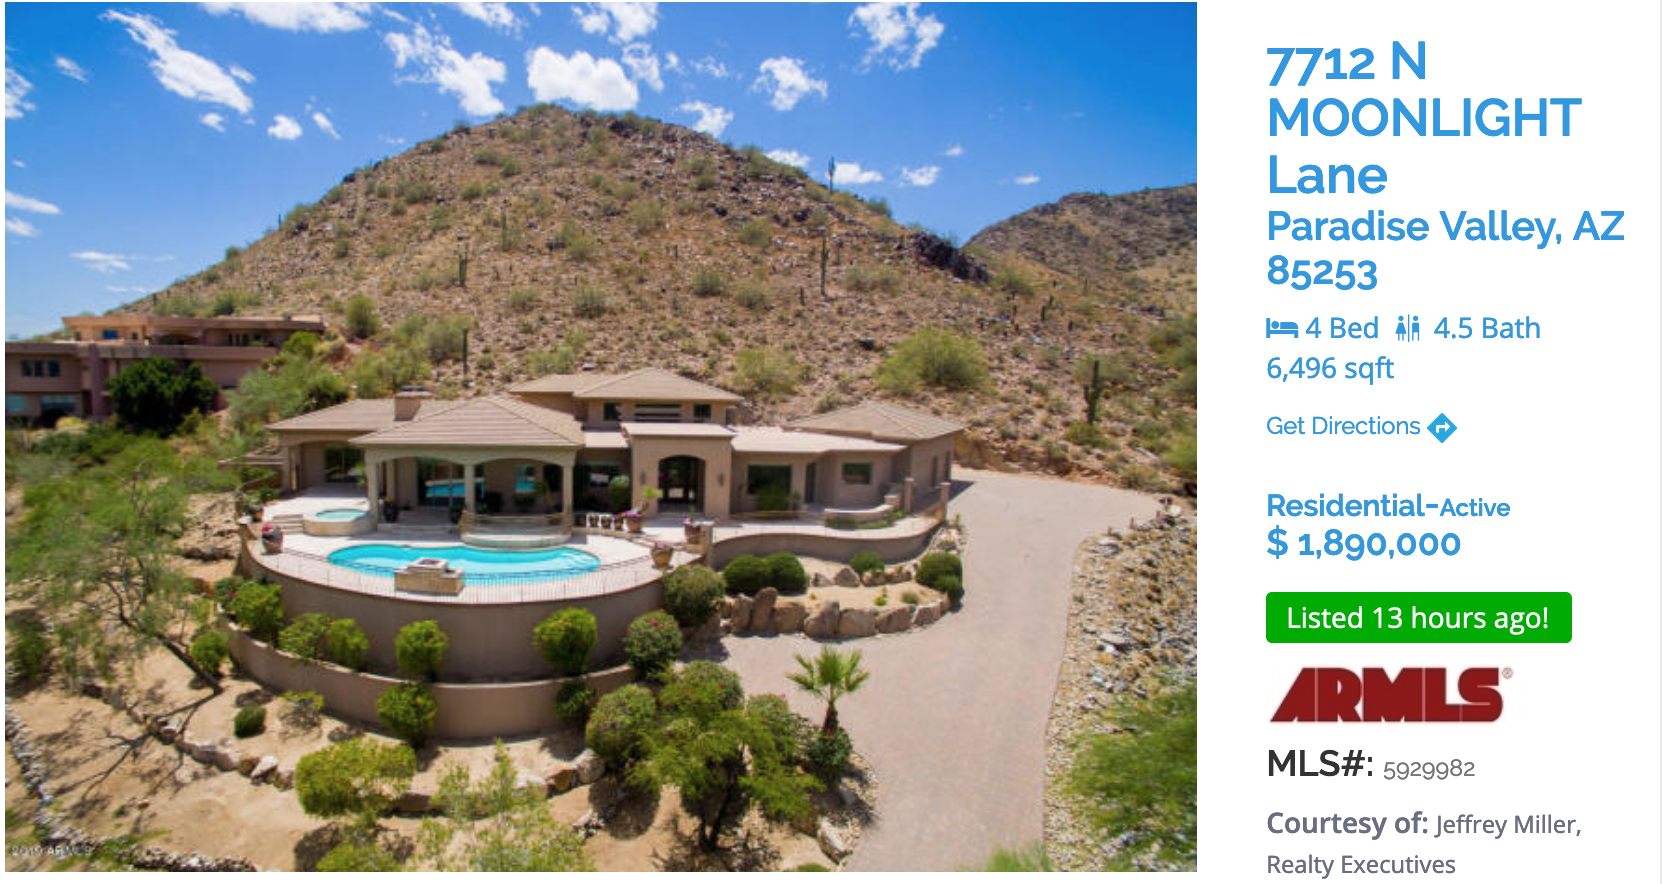 PARADISE VALLEY FEATURED HOME